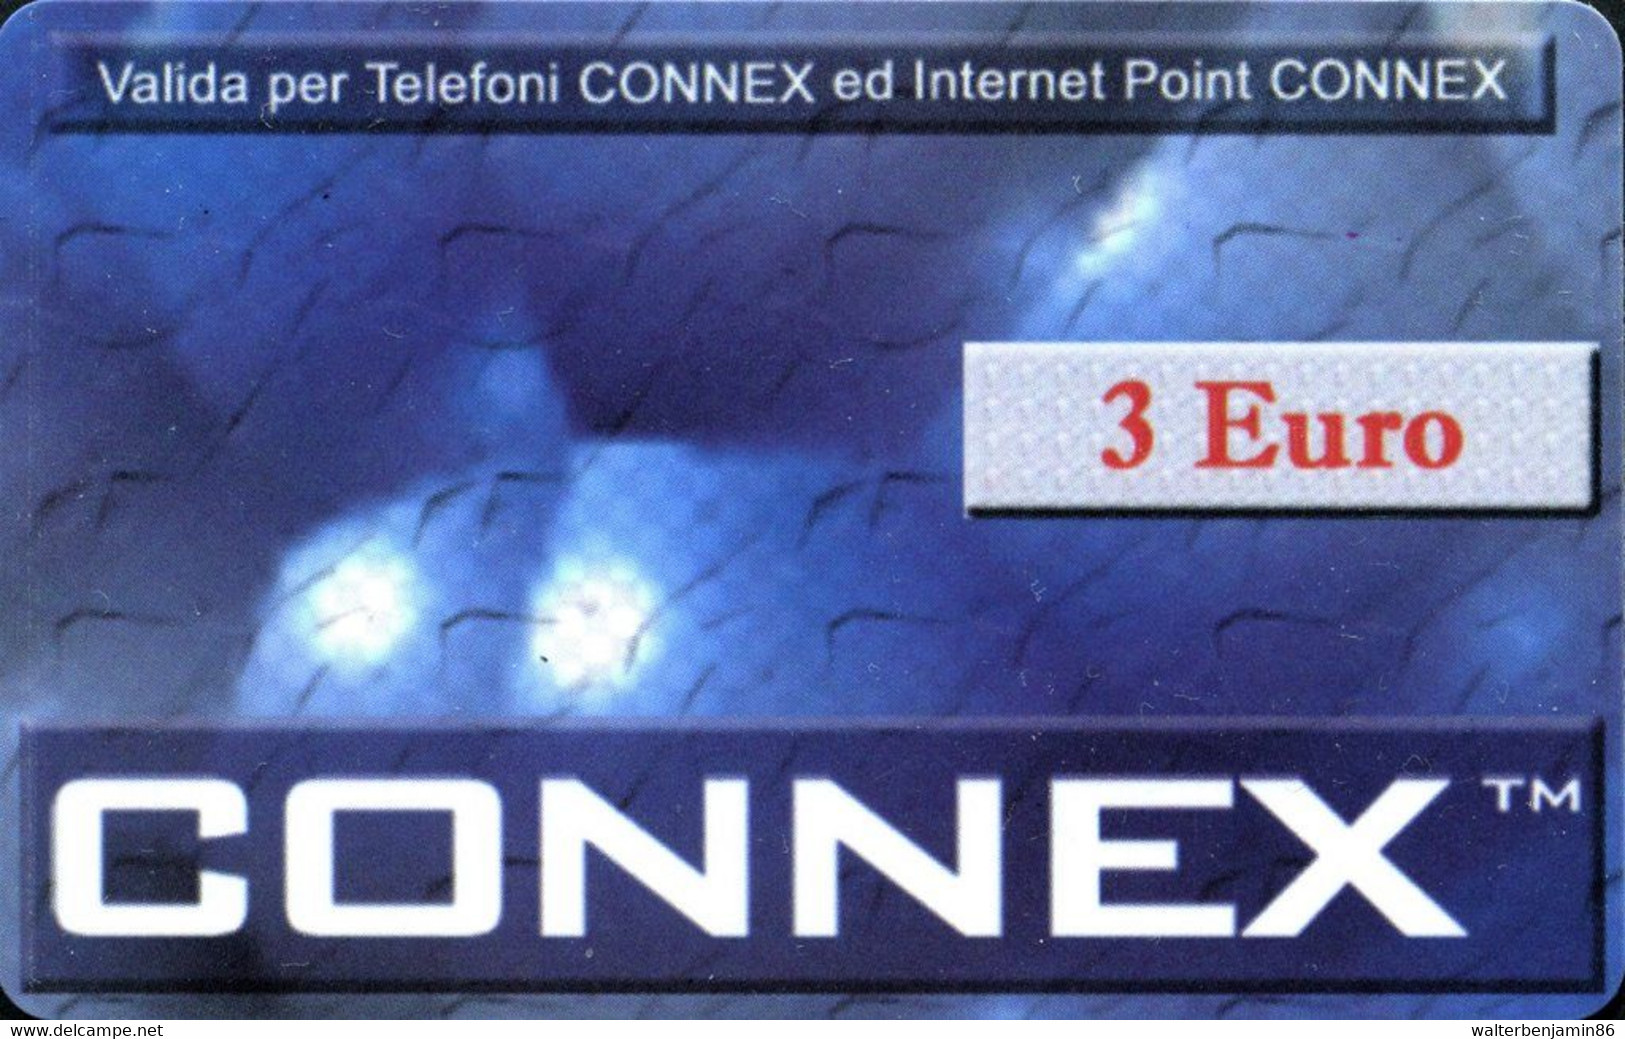 C&C 9060 A SCHEDA TELFONICA USI SPECIALI CONNEX 3 EURO DUMMY SENZA CHIP - Special Uses